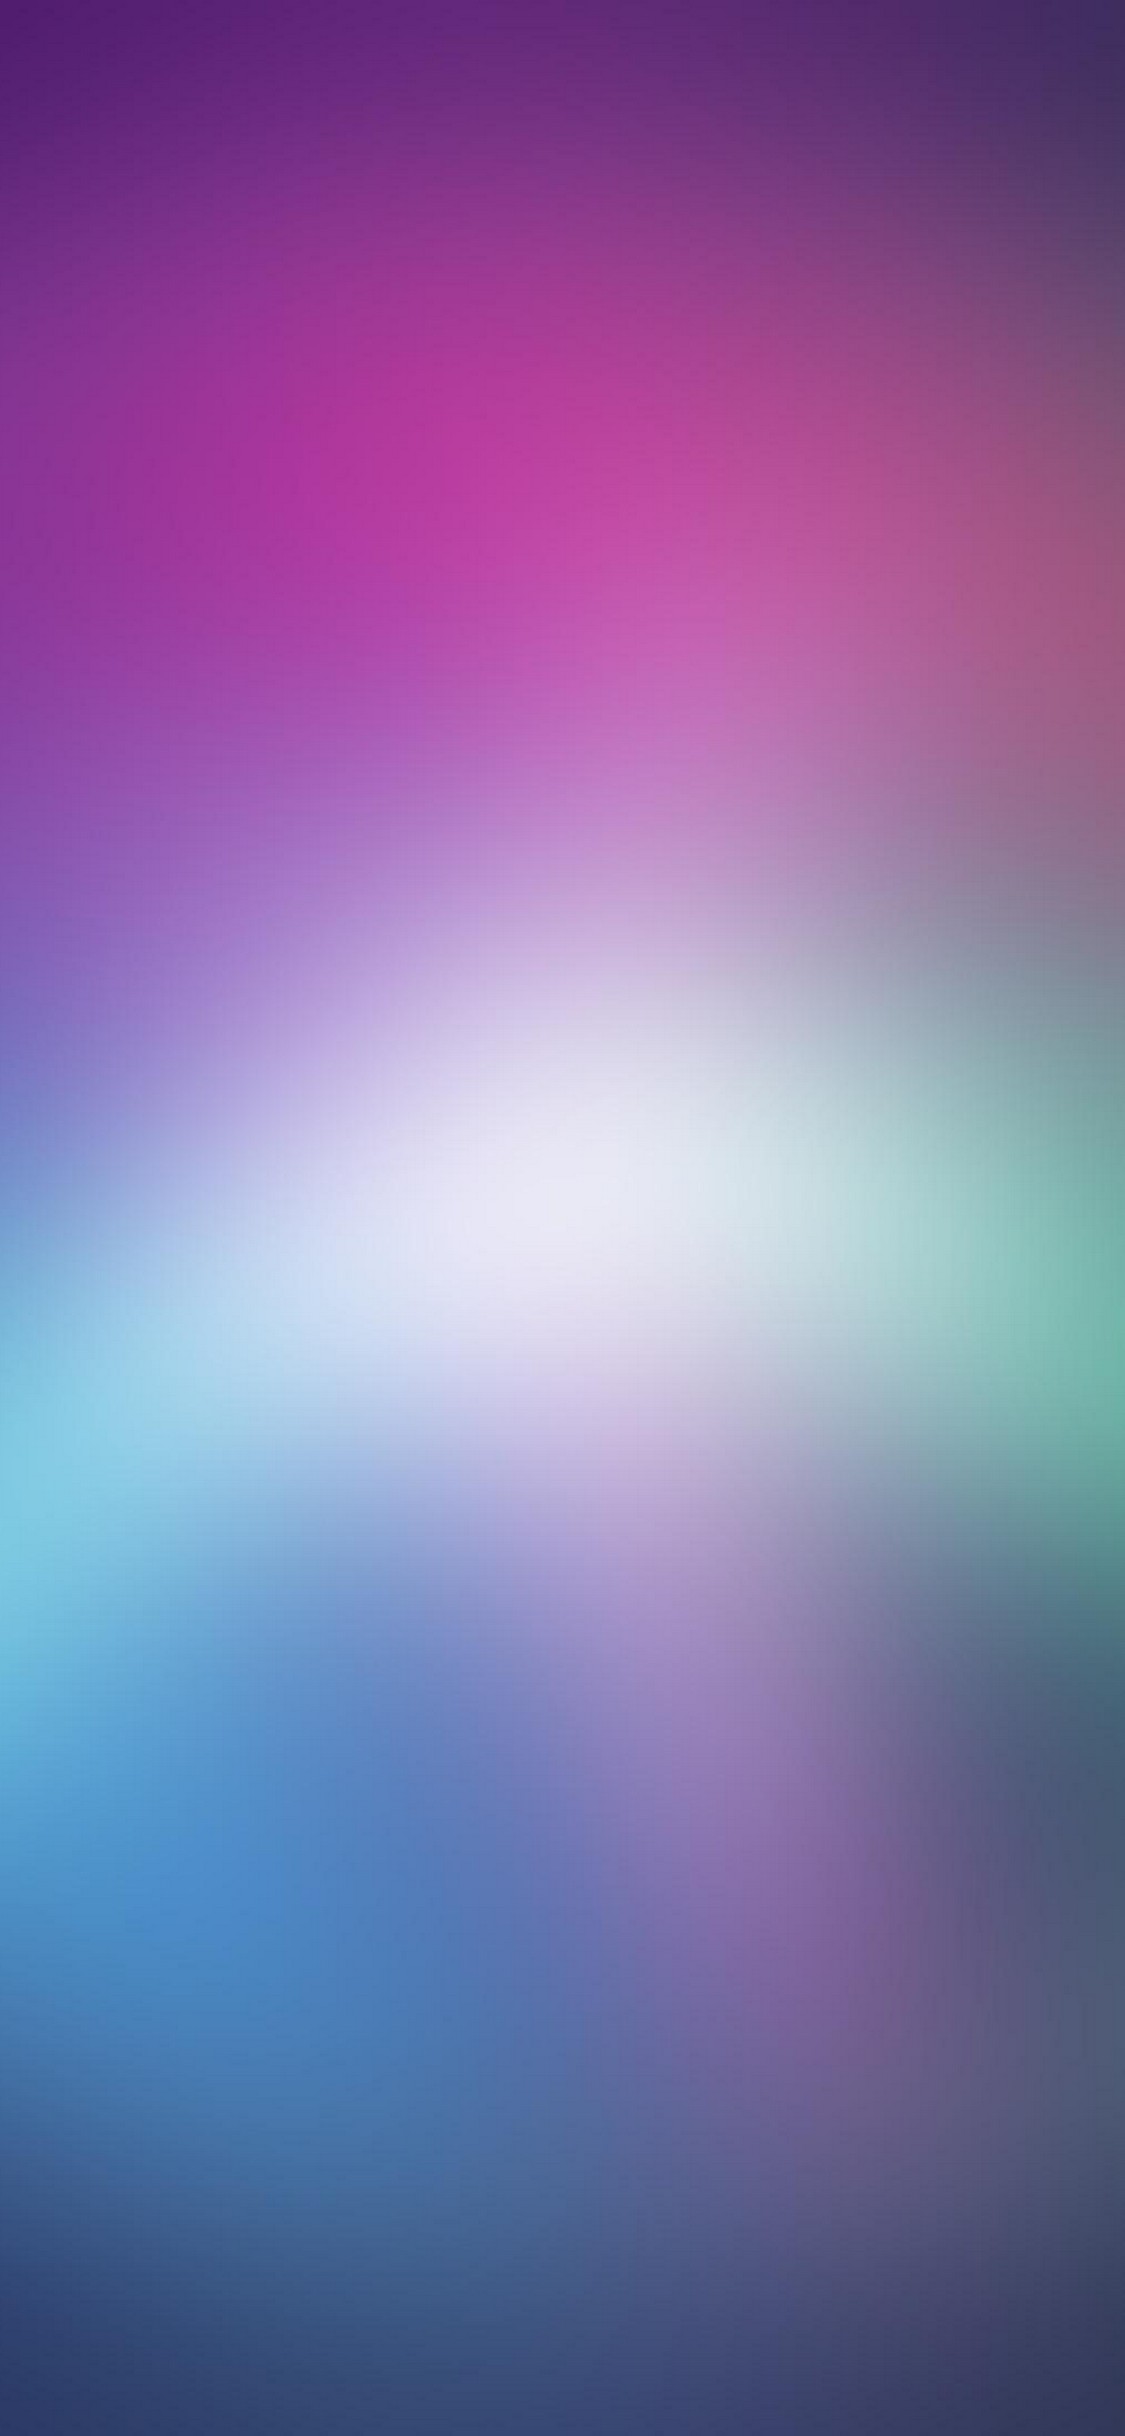 Iphone X Wallpaper Size With High-resolution Pixel - Siri Wallpaper Iphone  - 1125x2436 Wallpaper 